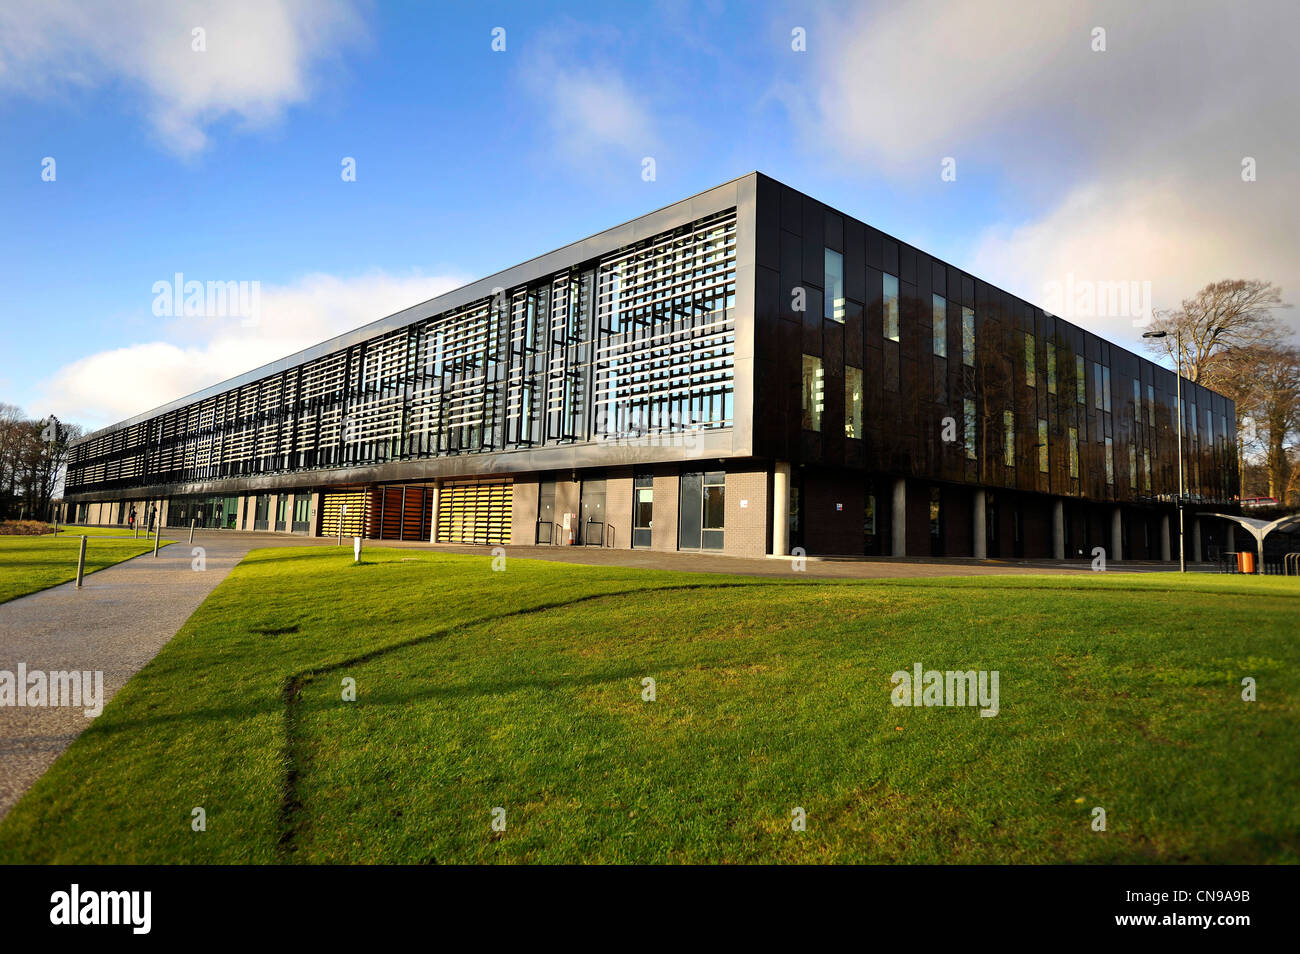 Exterior view of the new University of West of Scotland campus in Ayr, Ayrshire, Scotland. Stock Photo